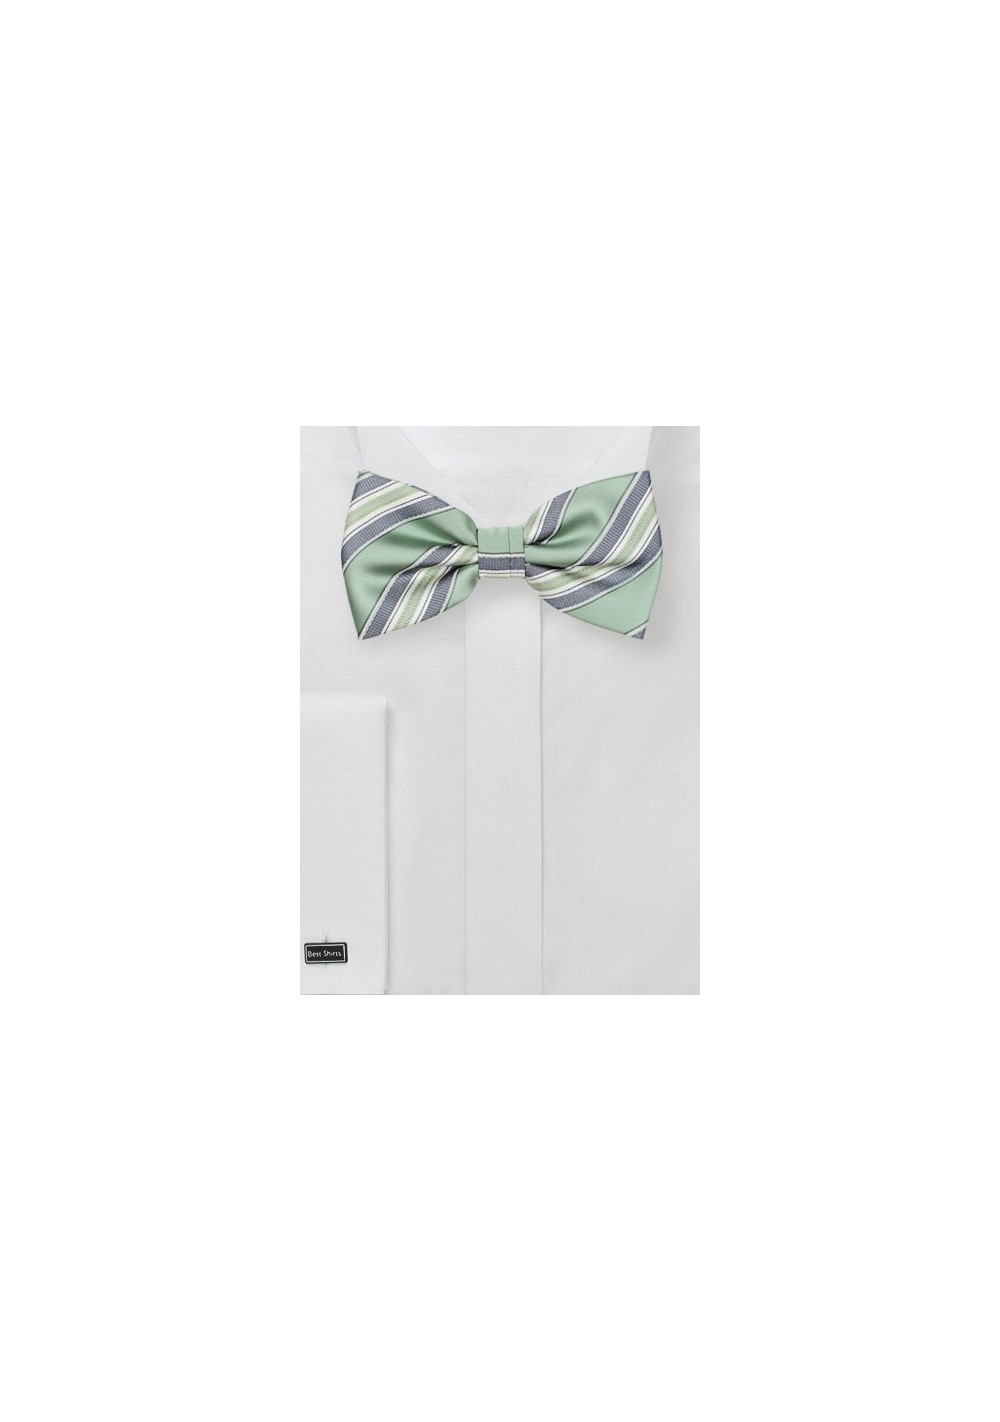 Striped Bow Tie in Clover Green